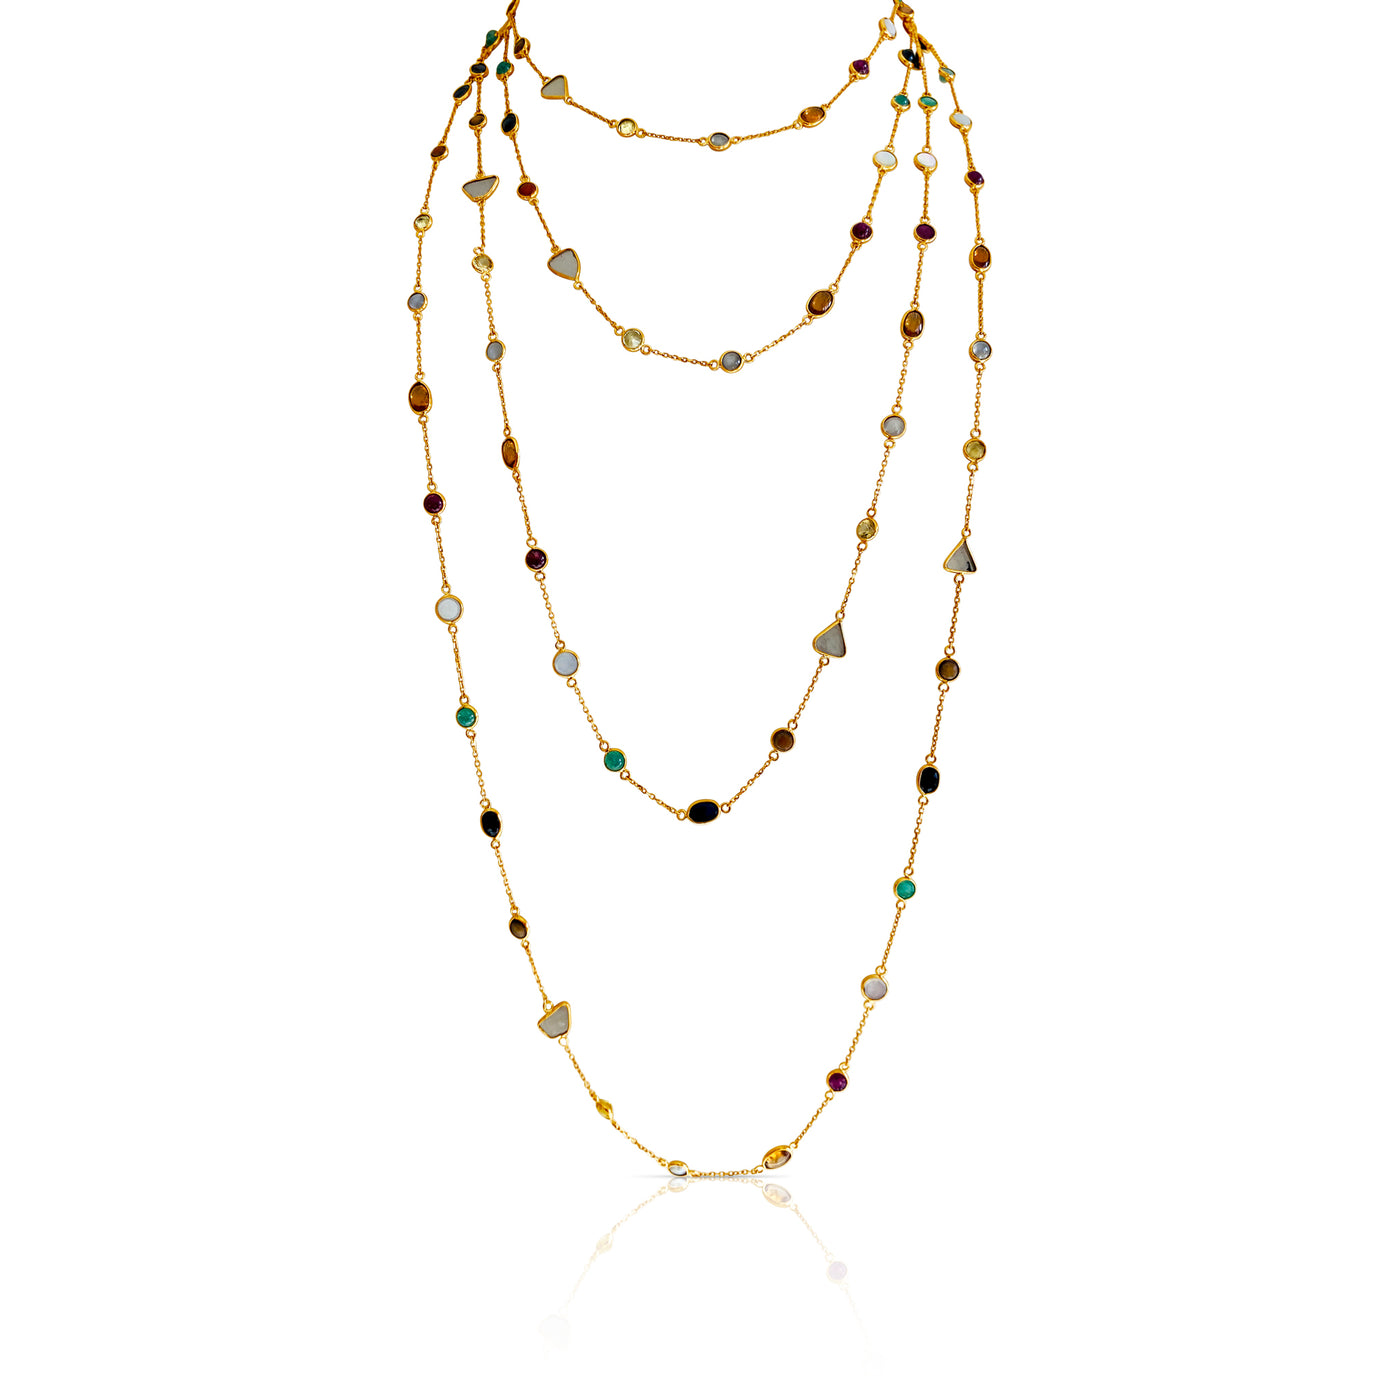 9 Precious Gemstone Necklace In 18K Yellow Gold